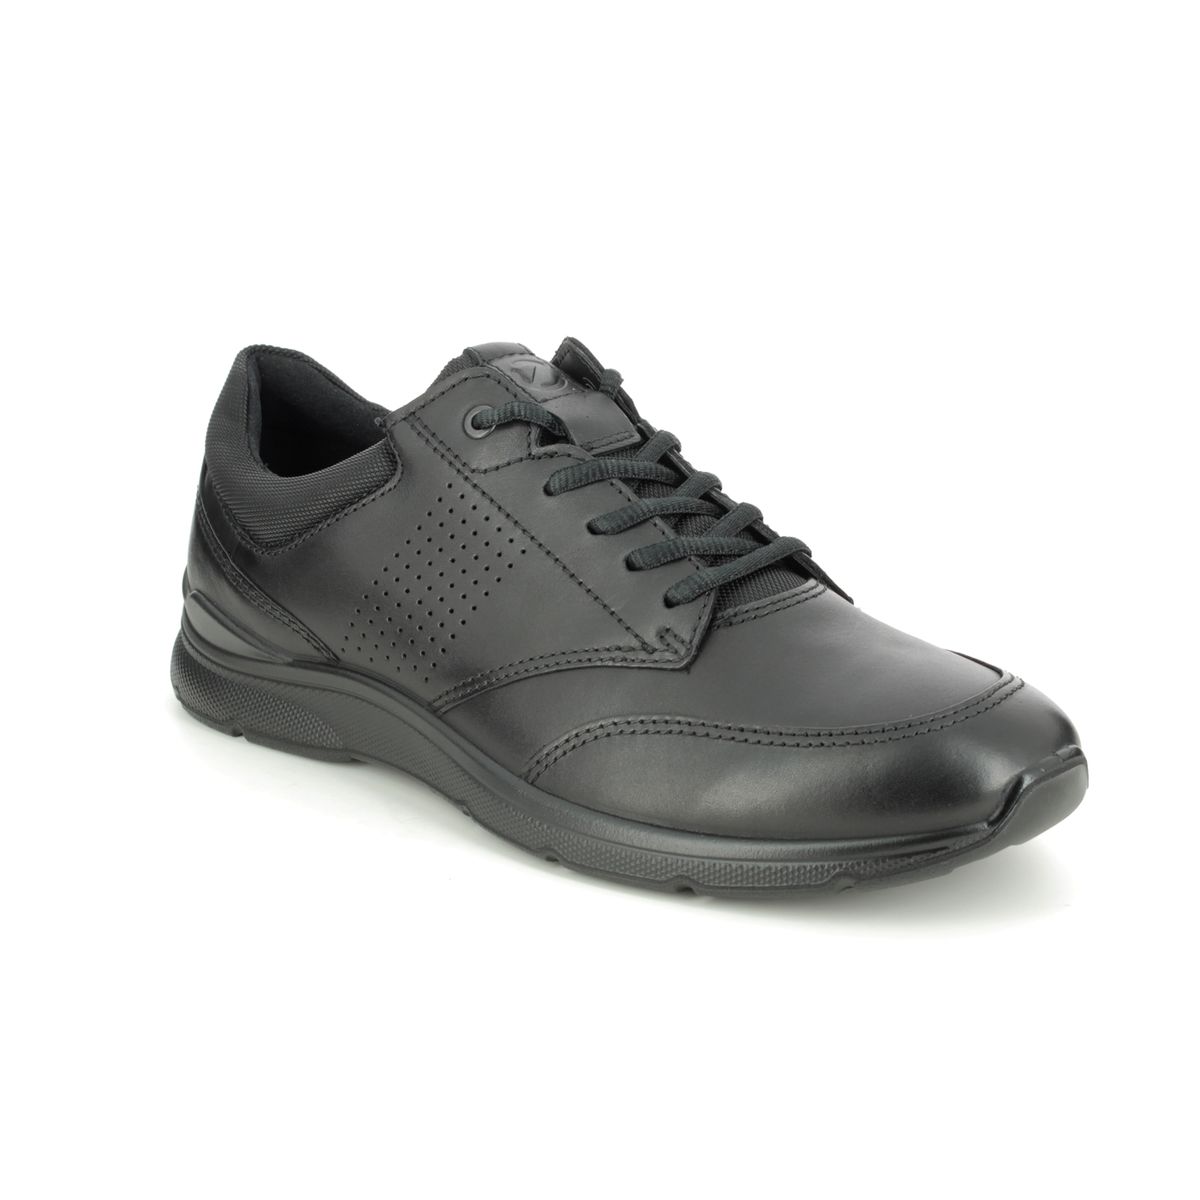 Ecco Irving Black Leather Mens Comfort Shoes 511734-51052 In Size 40 In Plain Black Leather